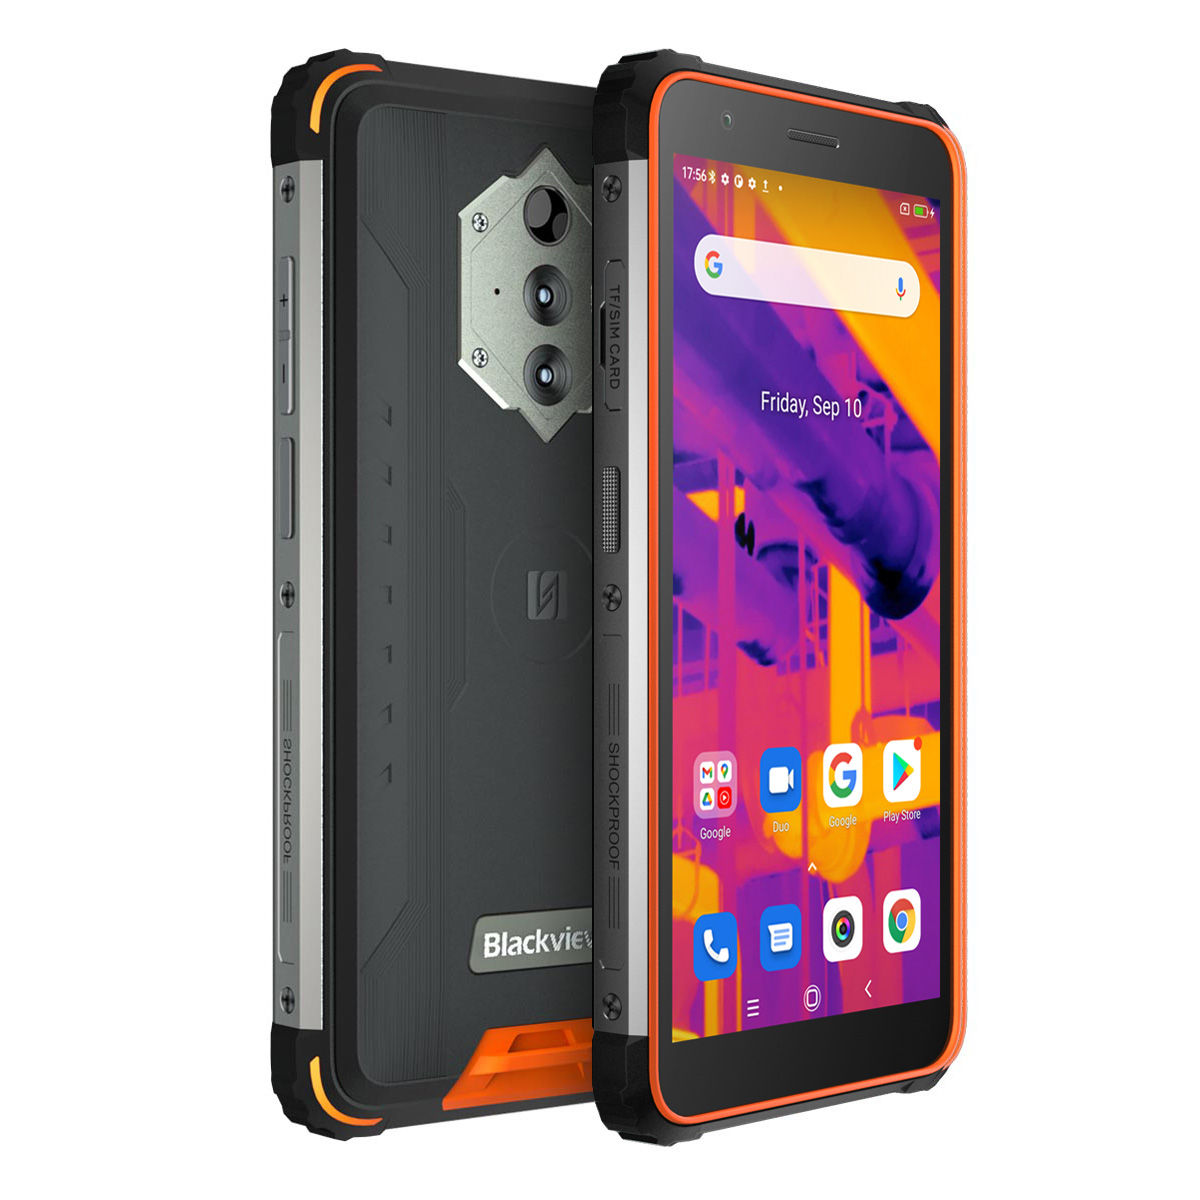 Blackview BV6600 Pro Thermal Camera, Android 11 Rugged Smartphone